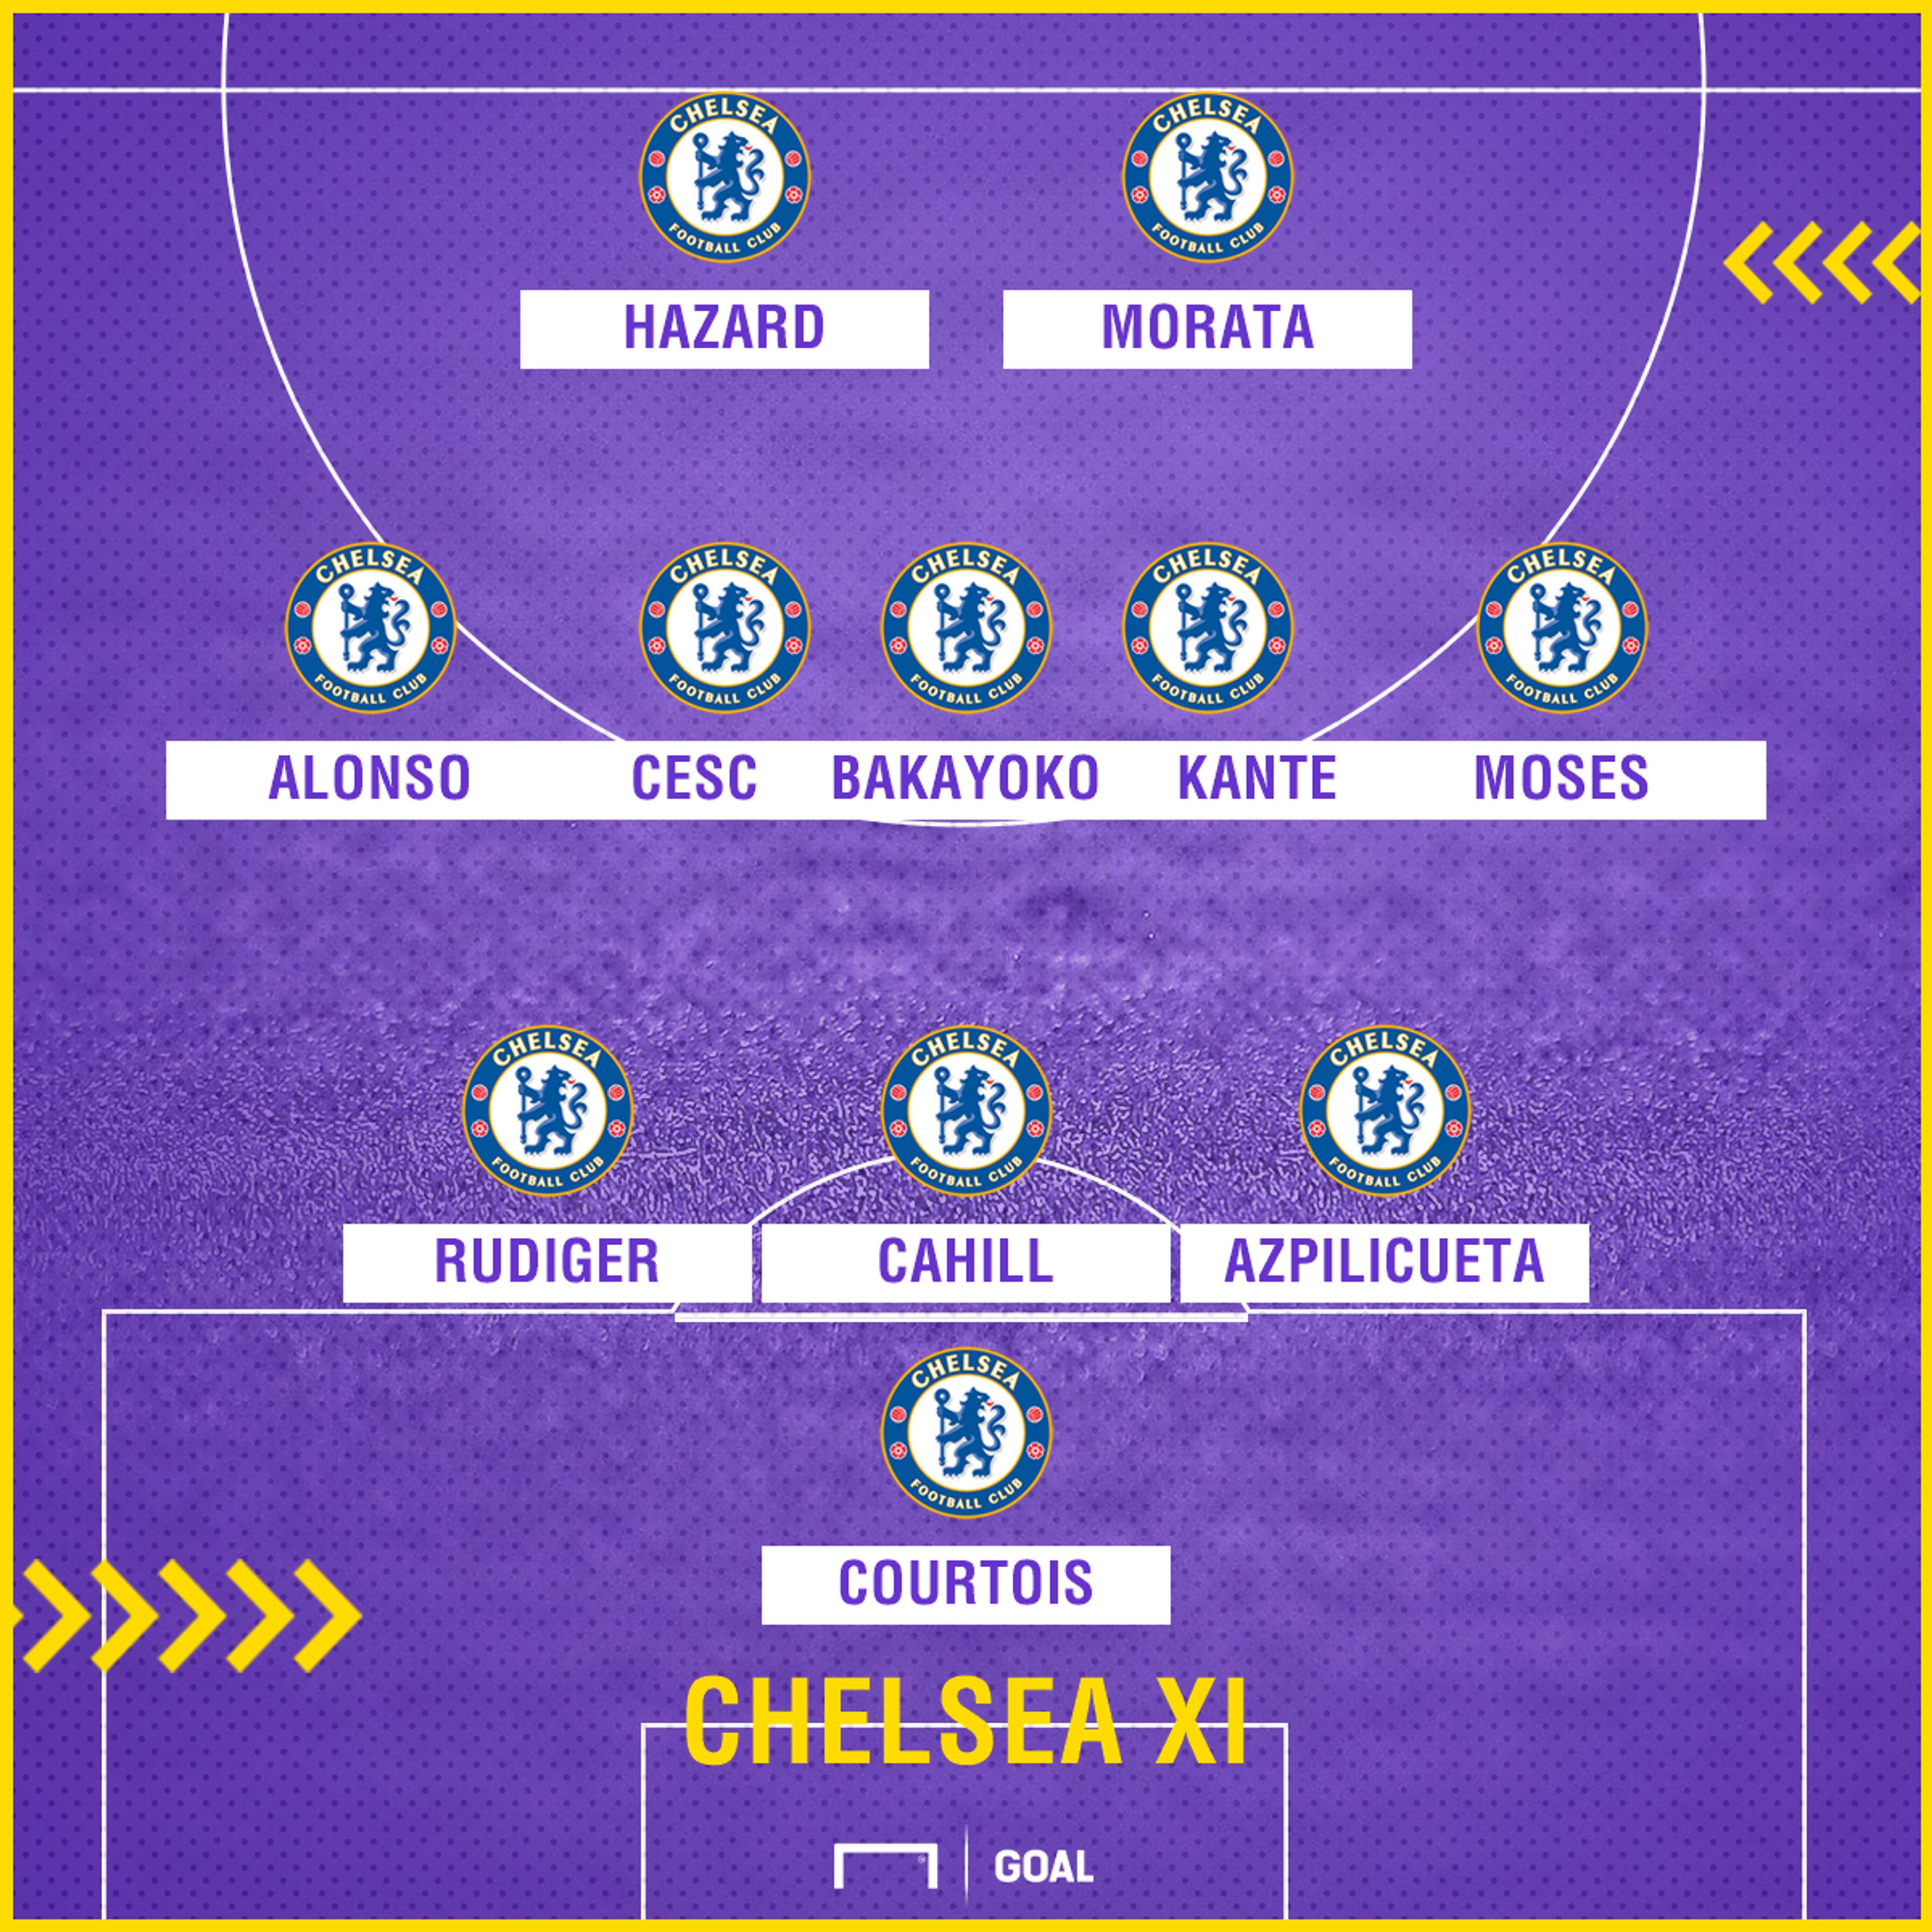 Chelsea XI v Leicester 130118